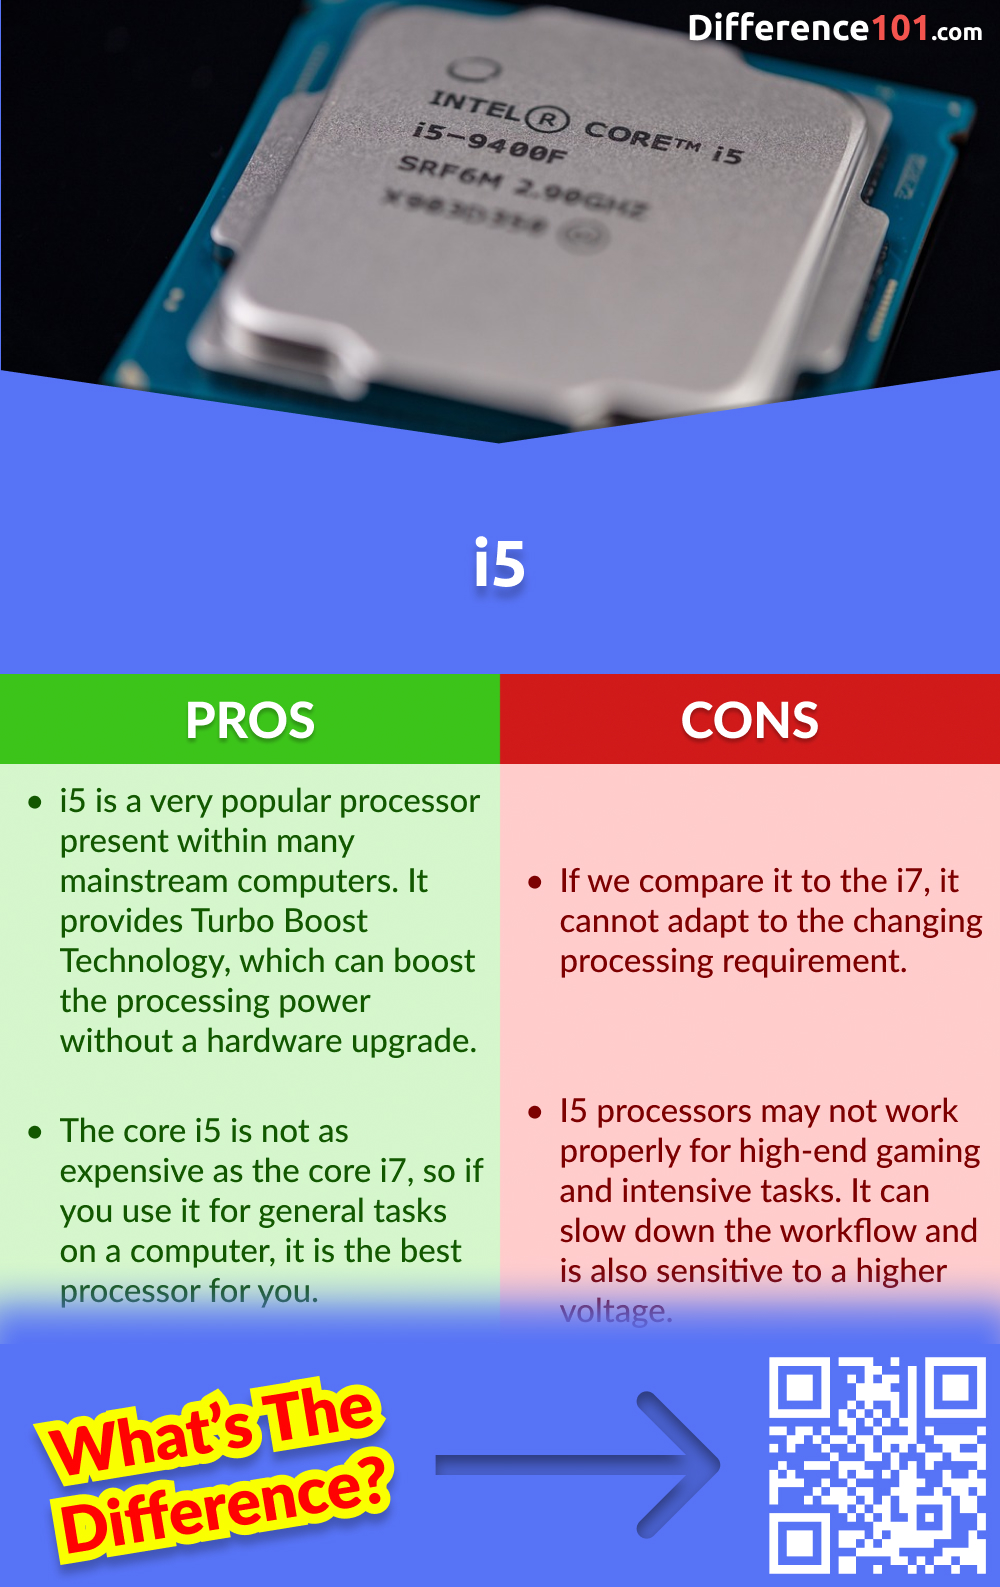 Core i5 Pros and Cons